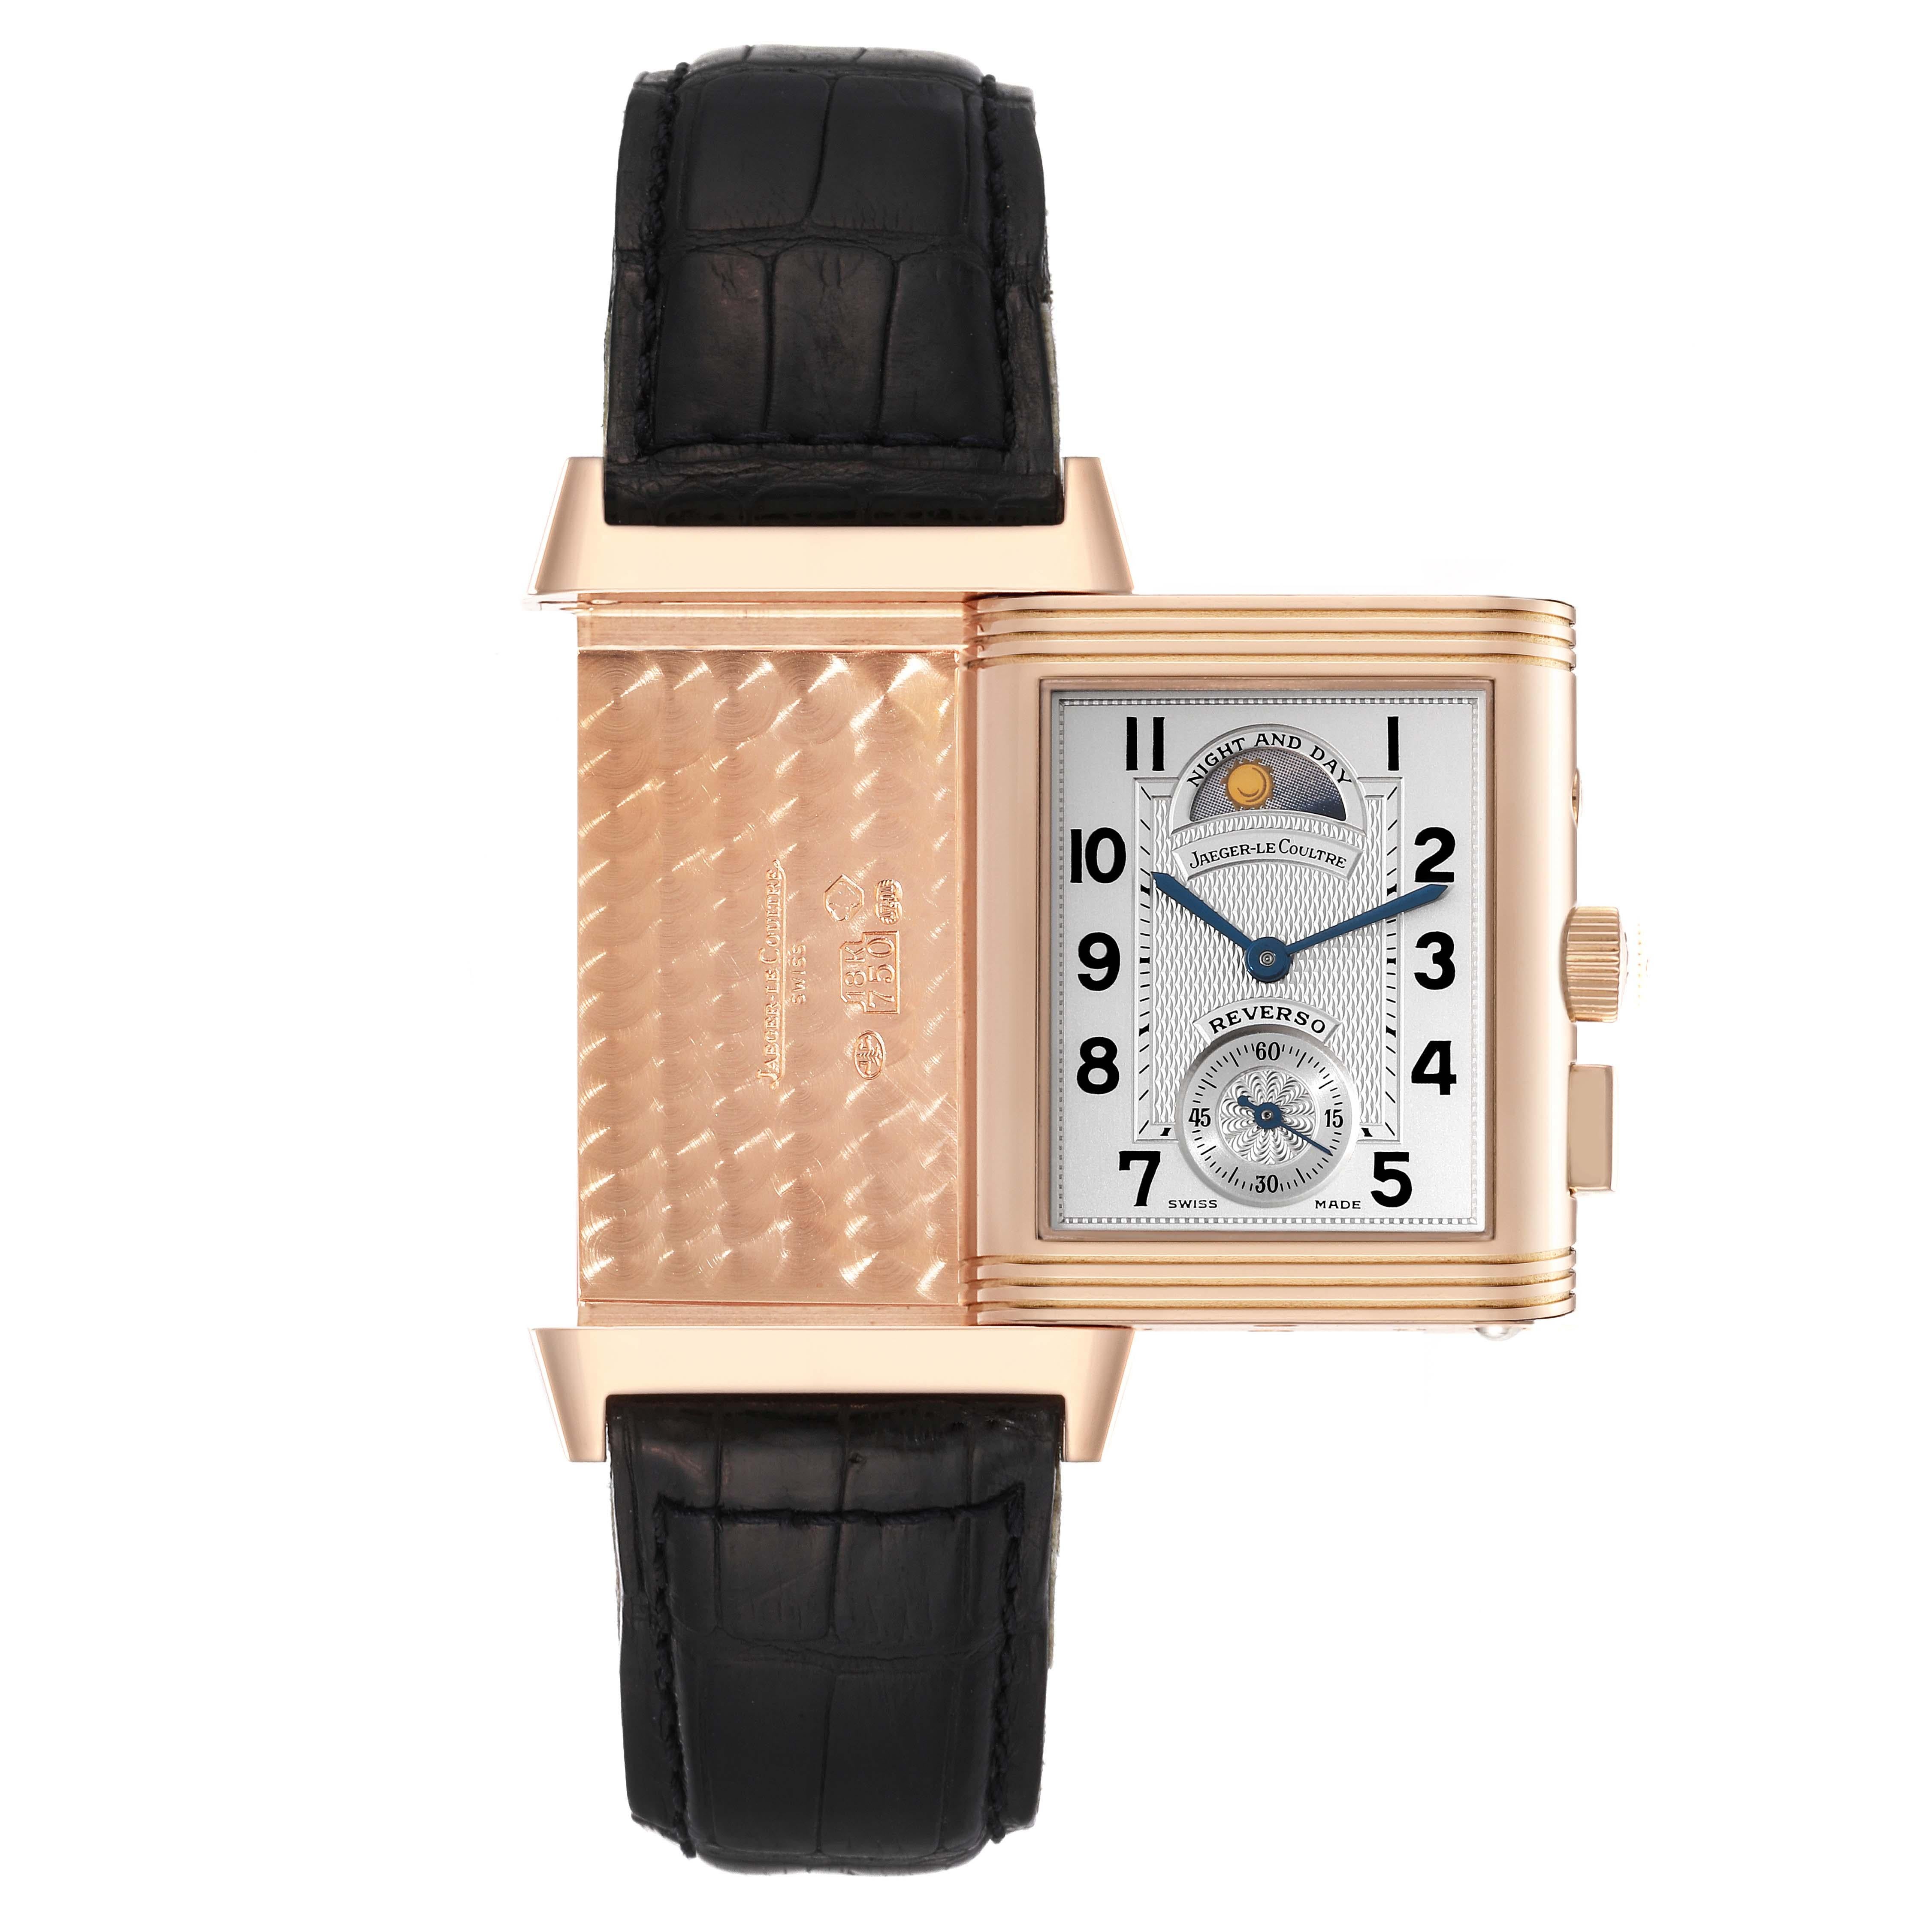 Jaeger LeCoultre Reverso Geographique LE Rose Gold Watch 270.2.582B Box Papers 4